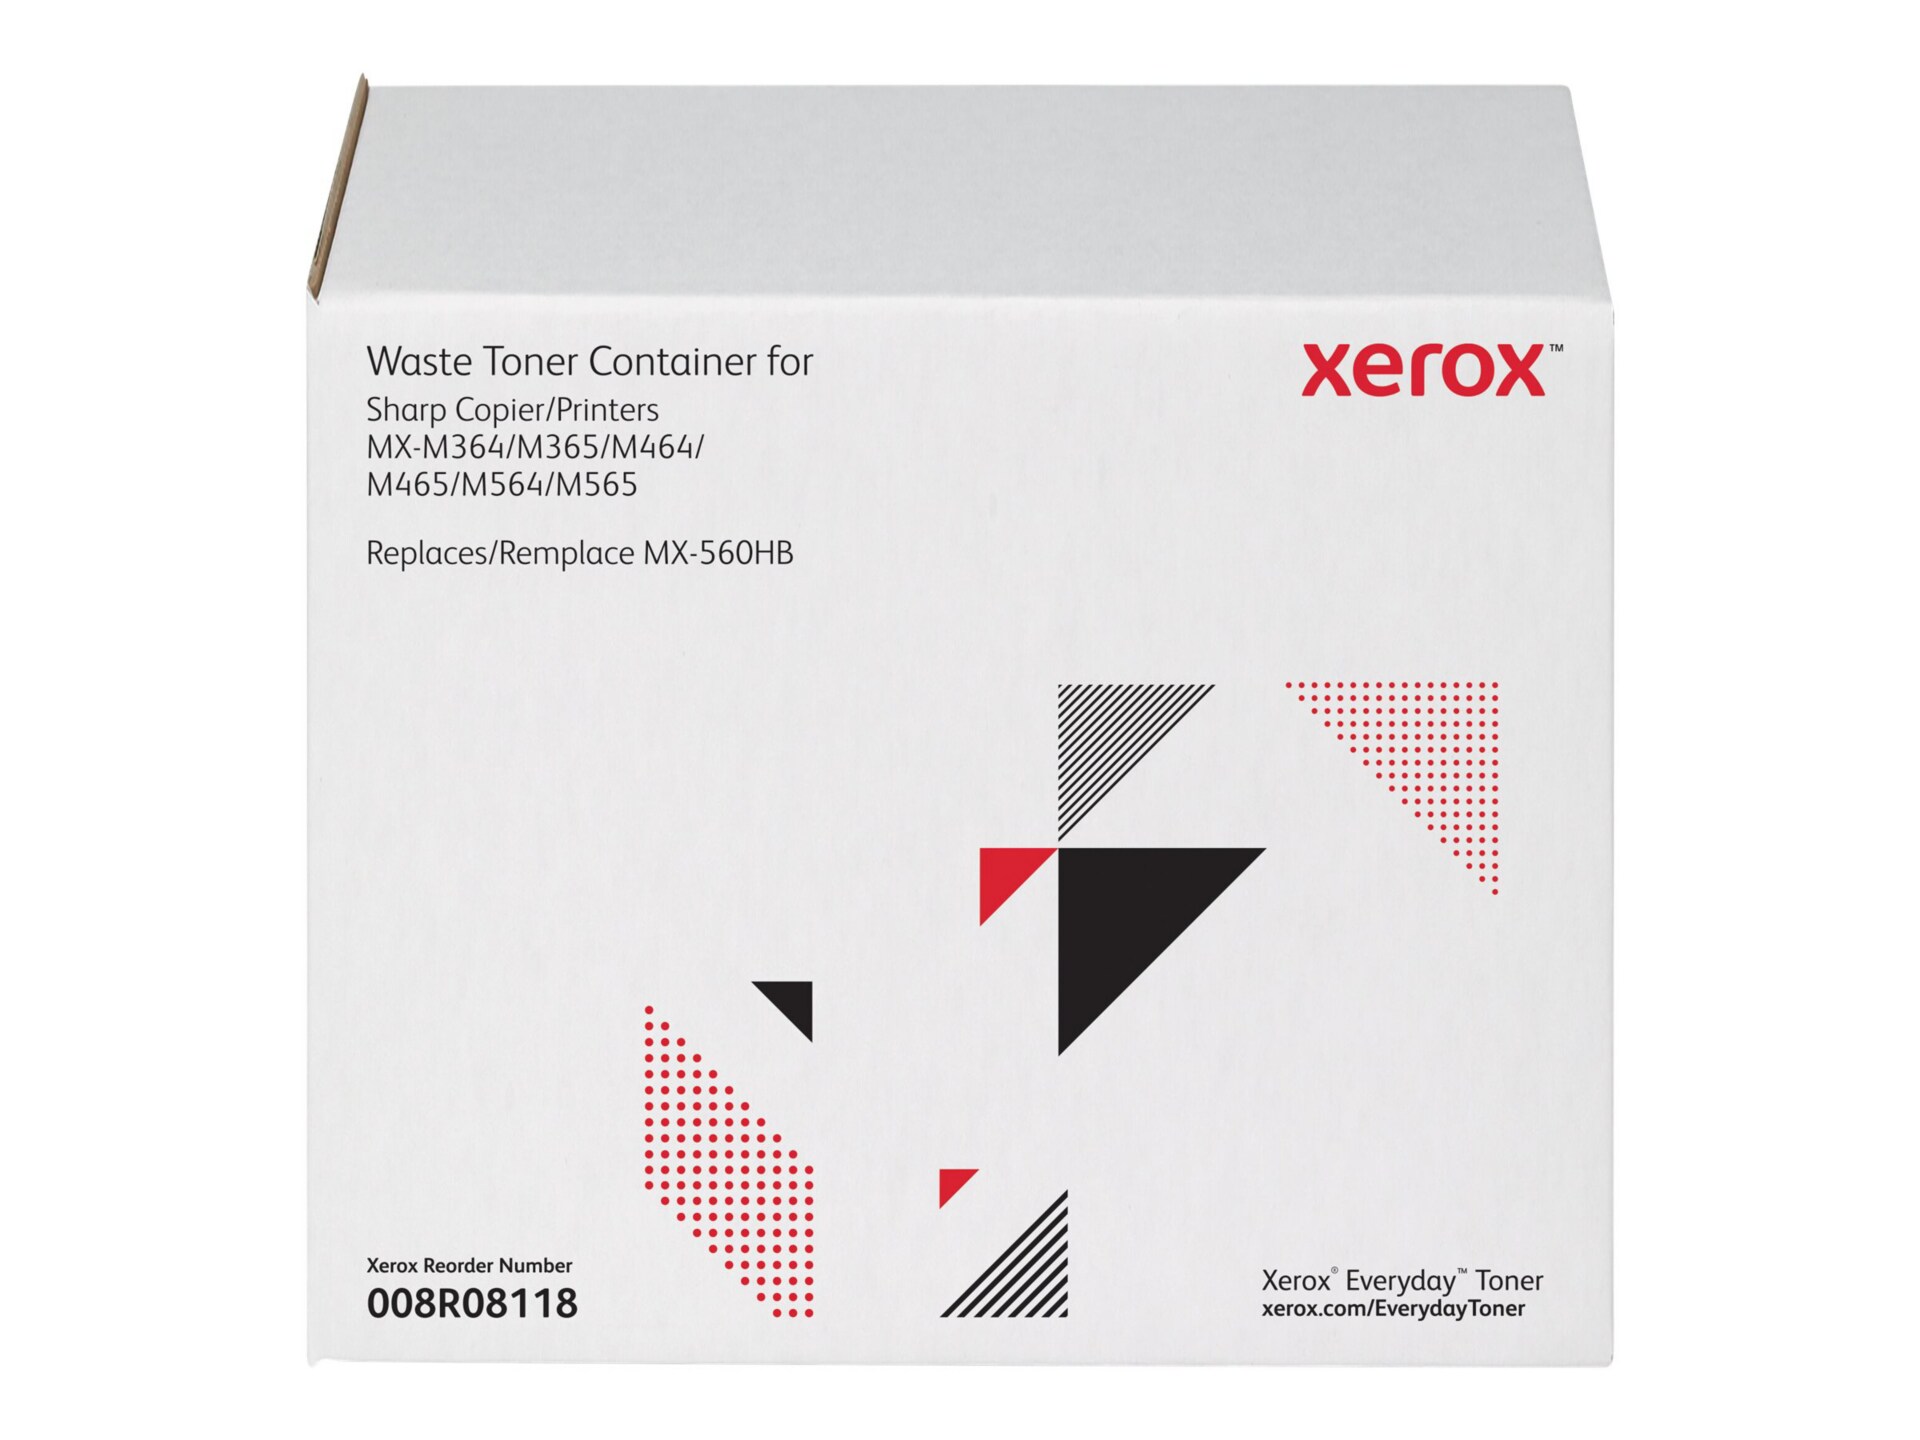 Xerox Everyday Waste Toner Cartridge, replacement for Sharp MX560HB